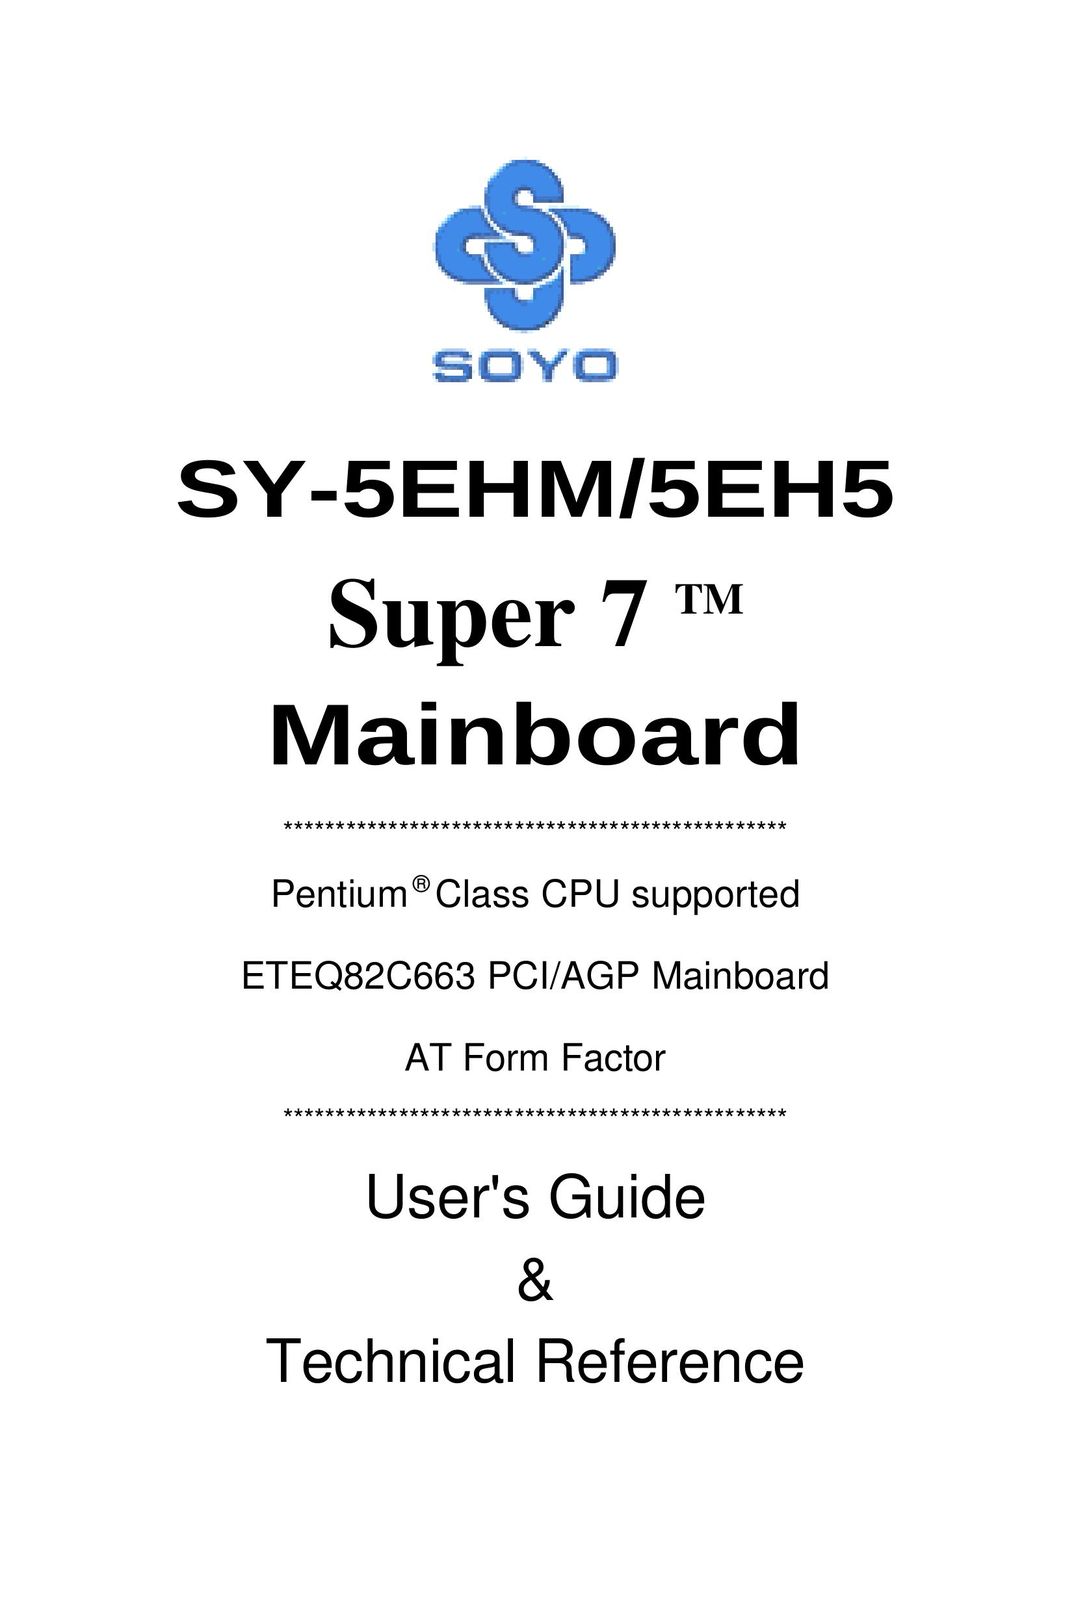 SOYO SY-5EHM/5EH5 Computer Hardware User Manual